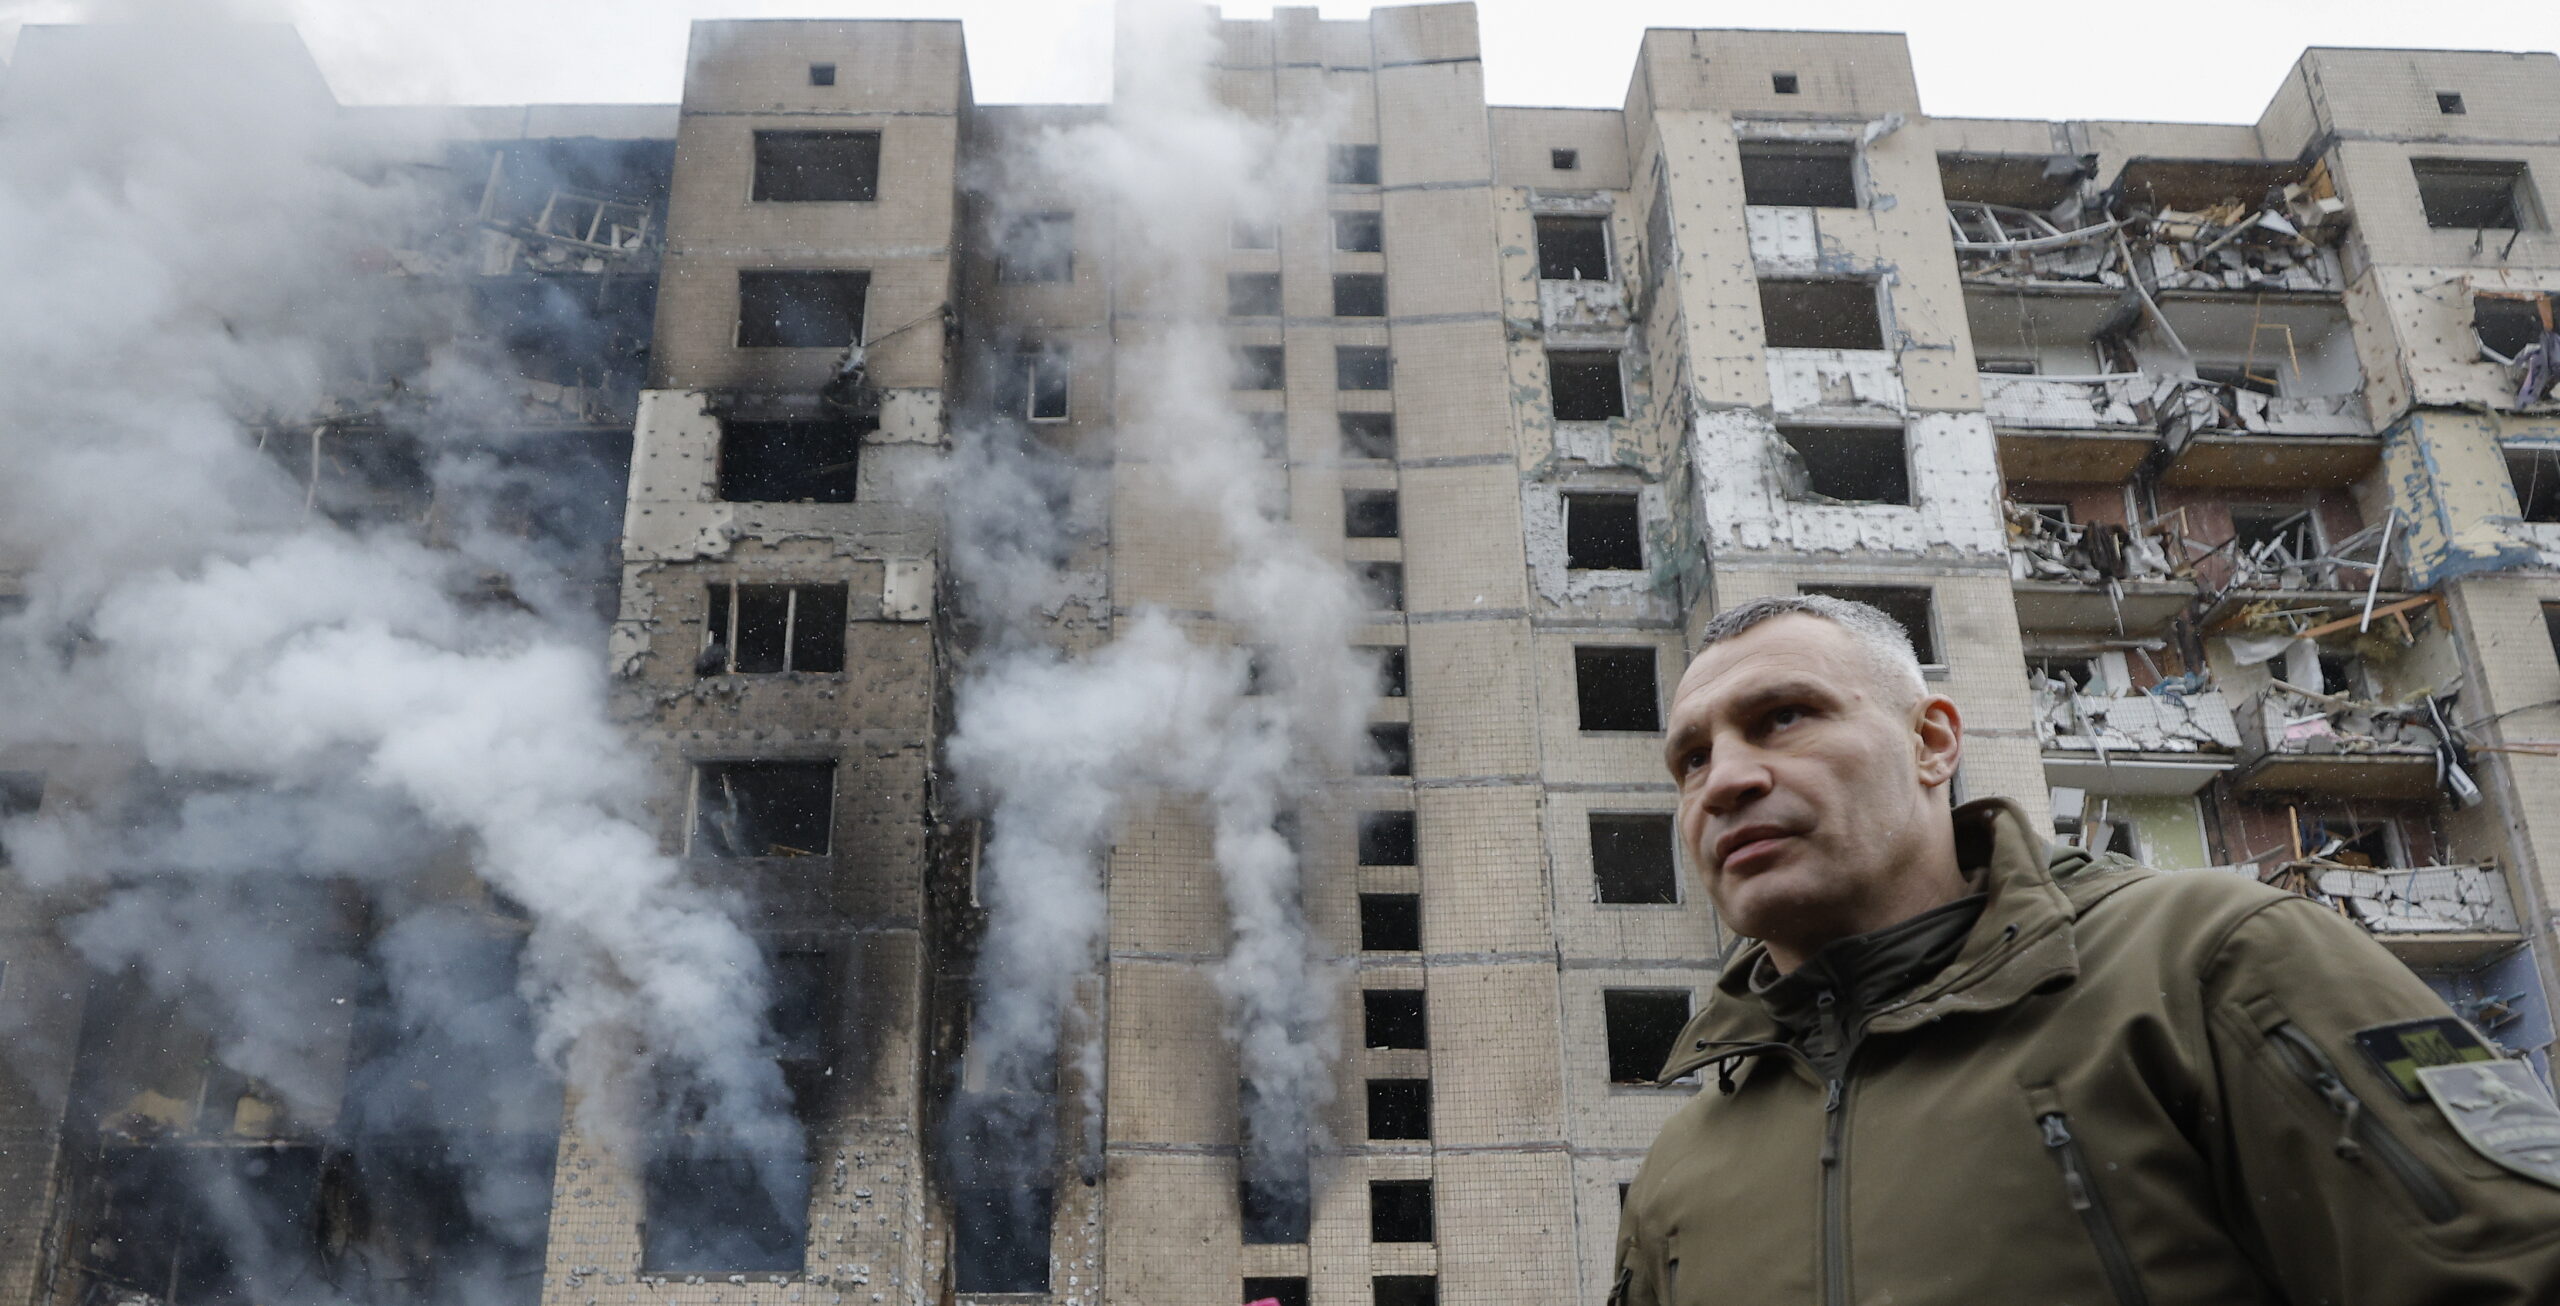 epa11053344 Mayor of Kyiv Vitali Klitschko inspects the site of a damaged building after a missile strike in Kyiv (Kiev), Ukraine, 02 January 2024, amid the Russian invasion. In the early hours of 02 January, Russia launched missile attacks targeting Kyiv and Kharkiv, local officials reported. At least two women were killed and nearly 70 others were injured in the two cities. In Kyiv, 27 people were hospitalized after a fire broke out in a multi-story building as a result of a rocket attack, the city mayor Vitali Klitschko wrote on telegram, adding that an injured elderly woman died in an ambulance. Some 130 residents were evacuated from the burning building, the State Emergency Service said.  EPA/SERGEY DOLZHENKO